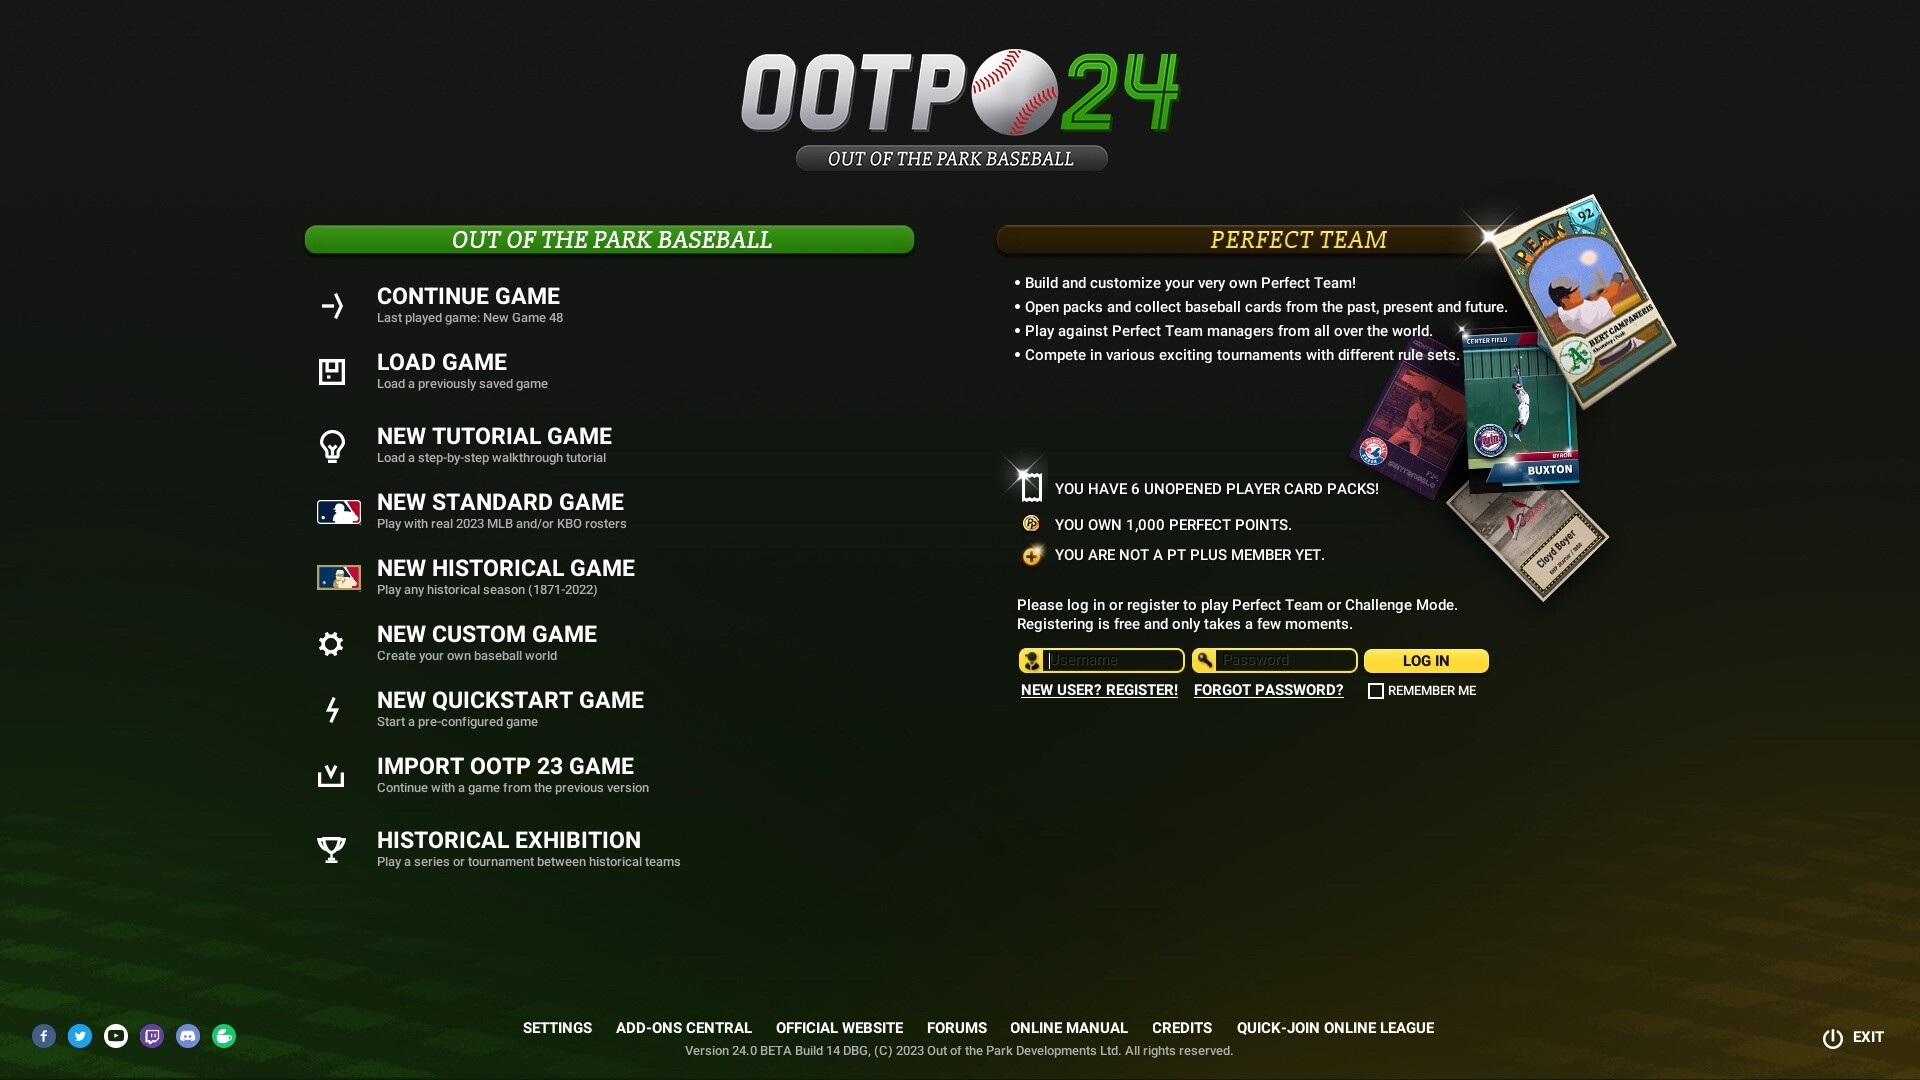 Out of the Park Baseball 24 Steam CD Key 197.49$